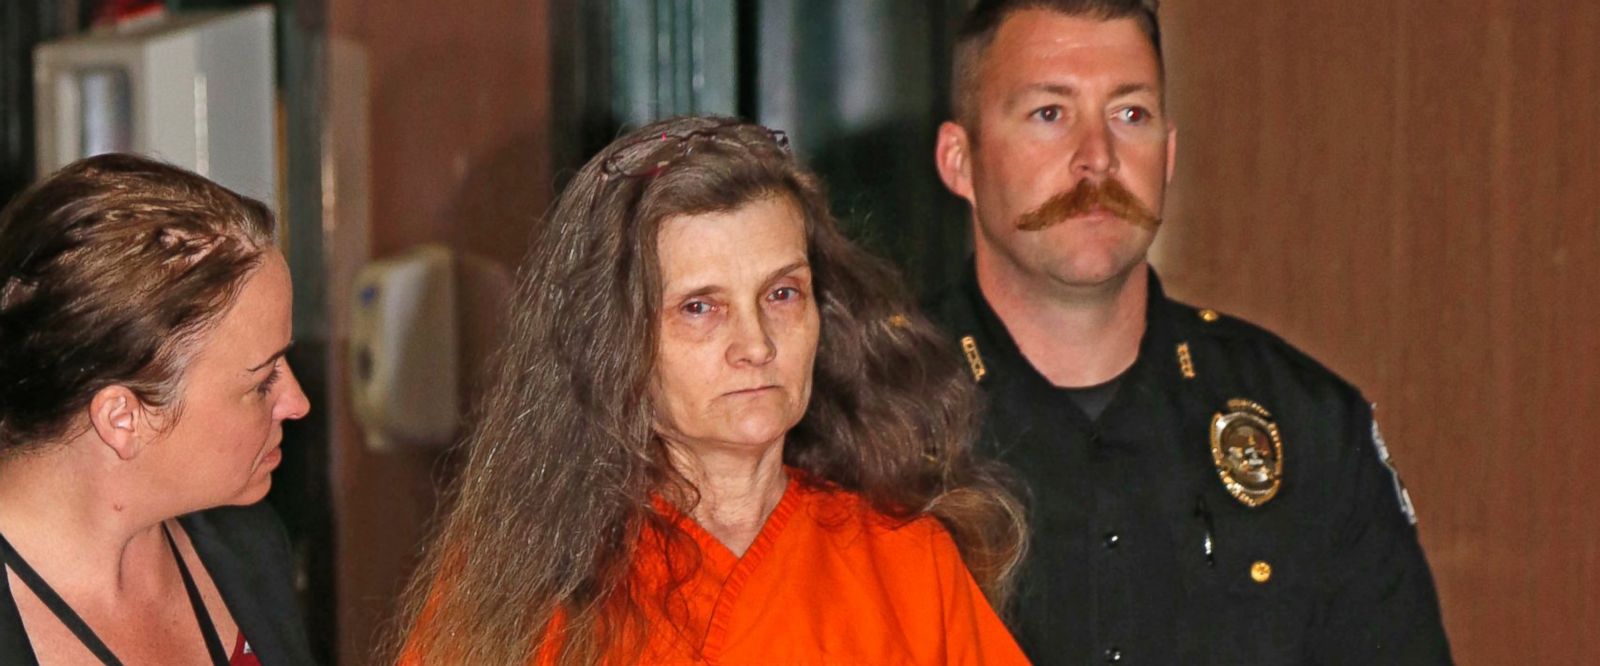 Oklahoma ‘witch’ gets life terms for terrorizing grandchild